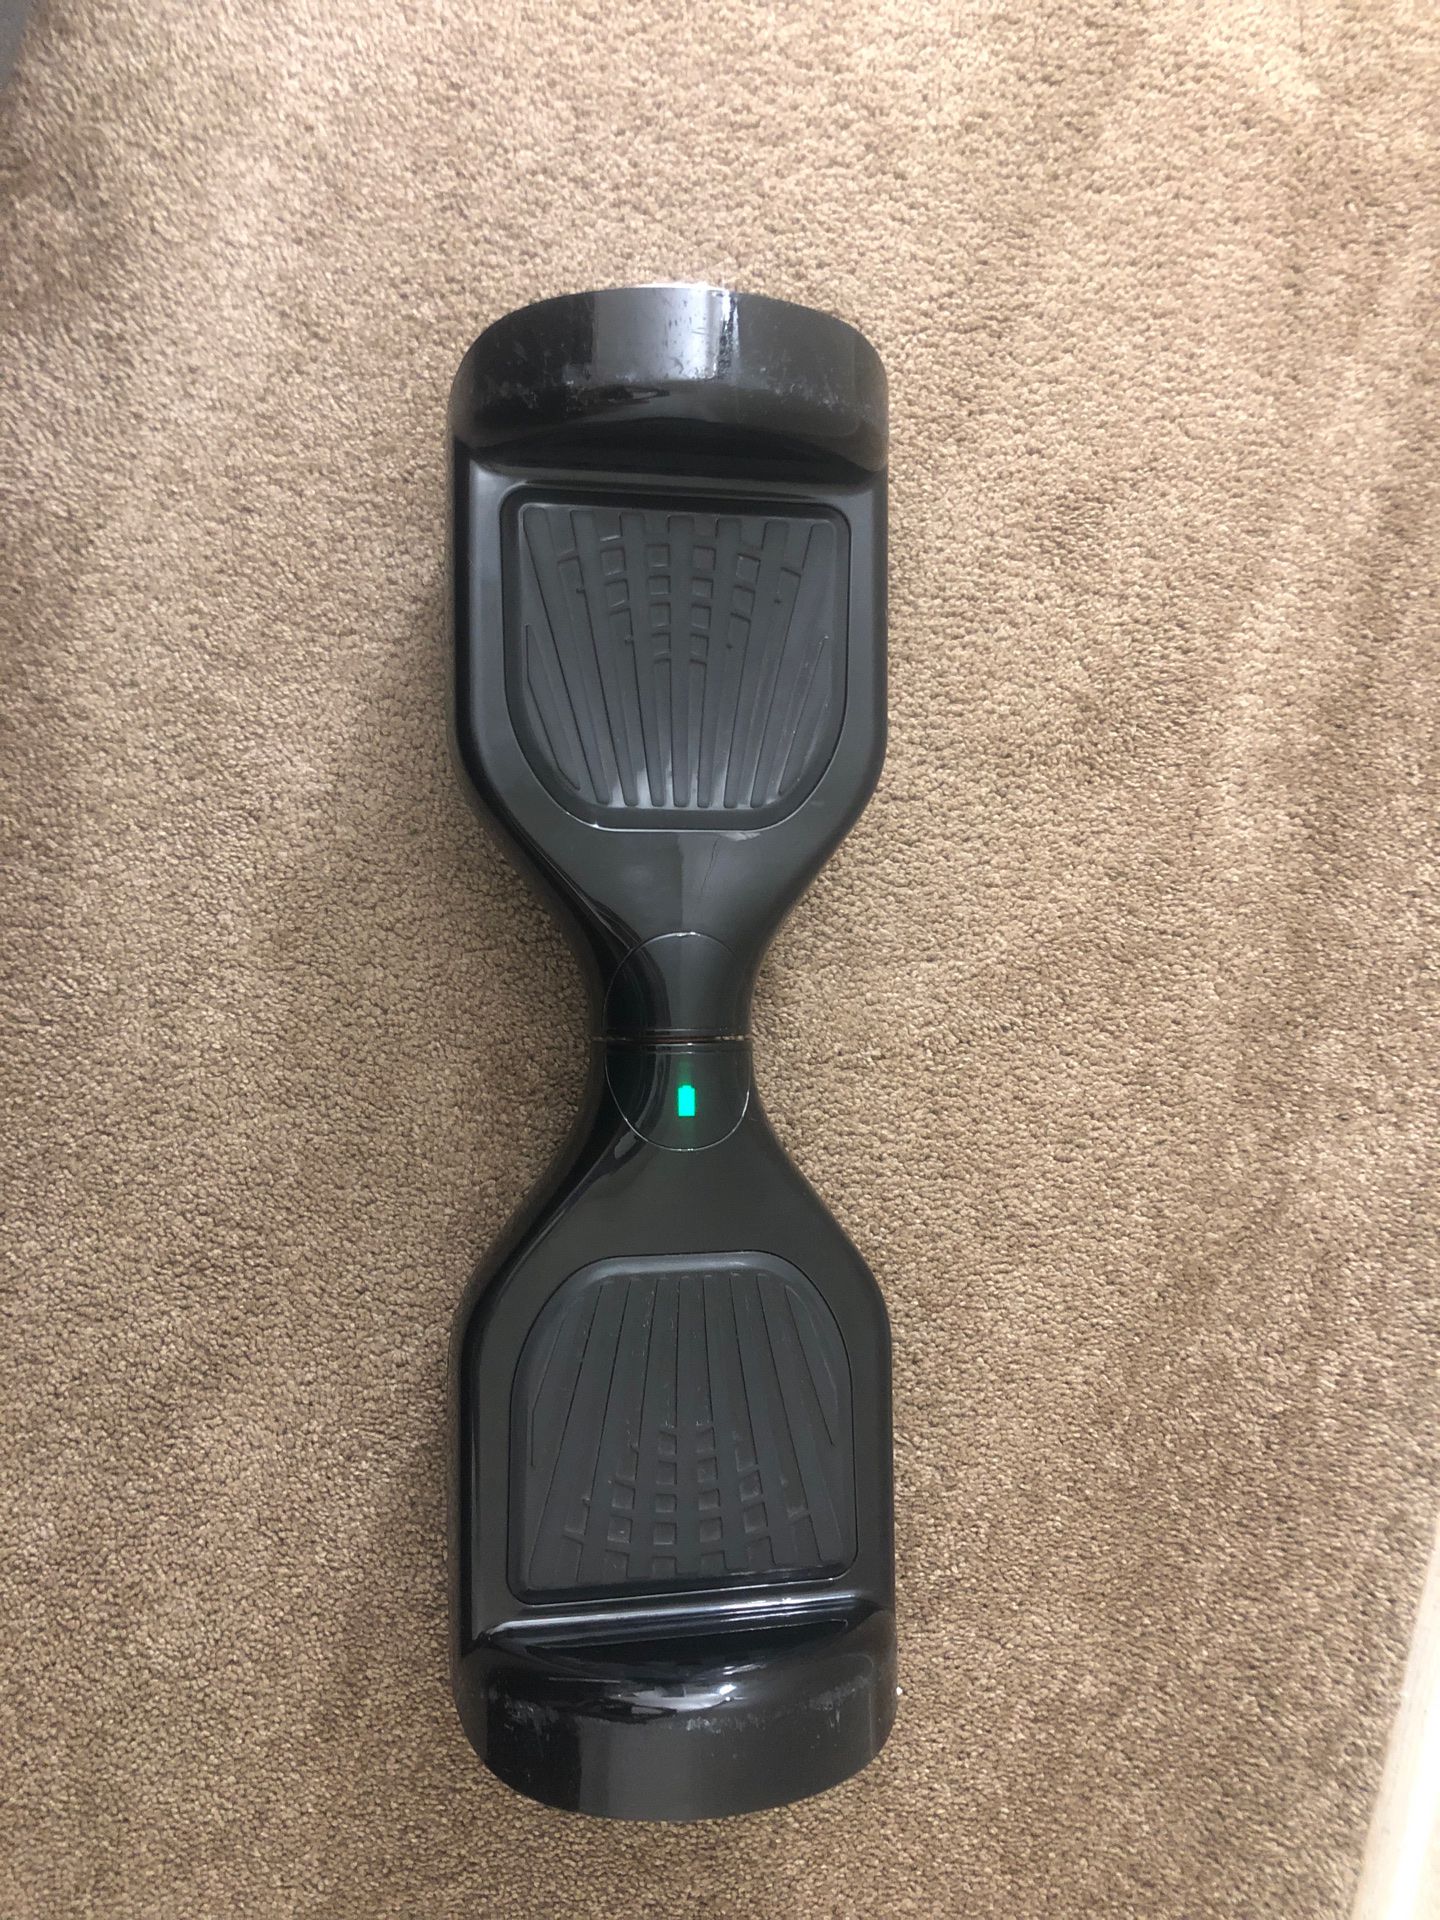 Hoverboard comes with charger